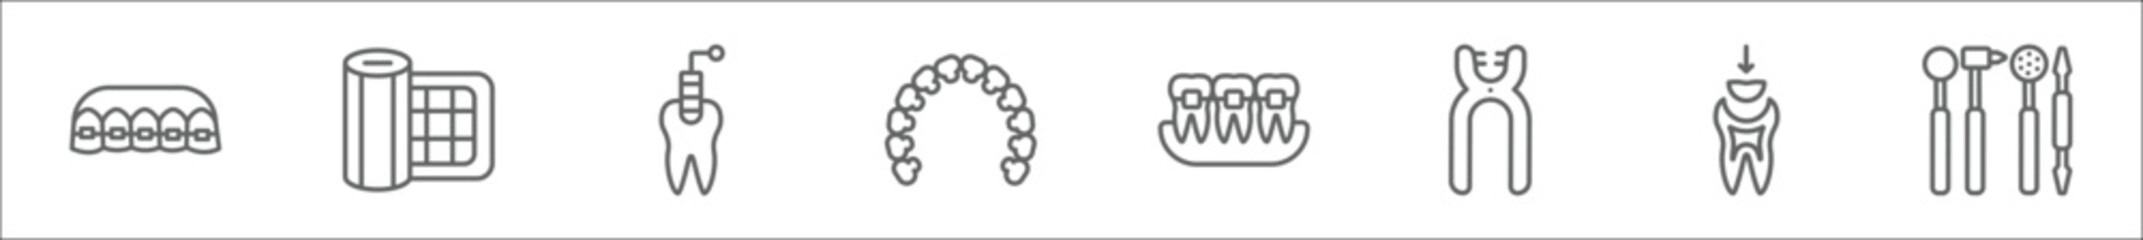 outline set of dentist line icons. linear vector icons such as brackets, gauze, tampon, lingual braces, dental brackets, forceps of dentist tools, dental filling, dentist tools